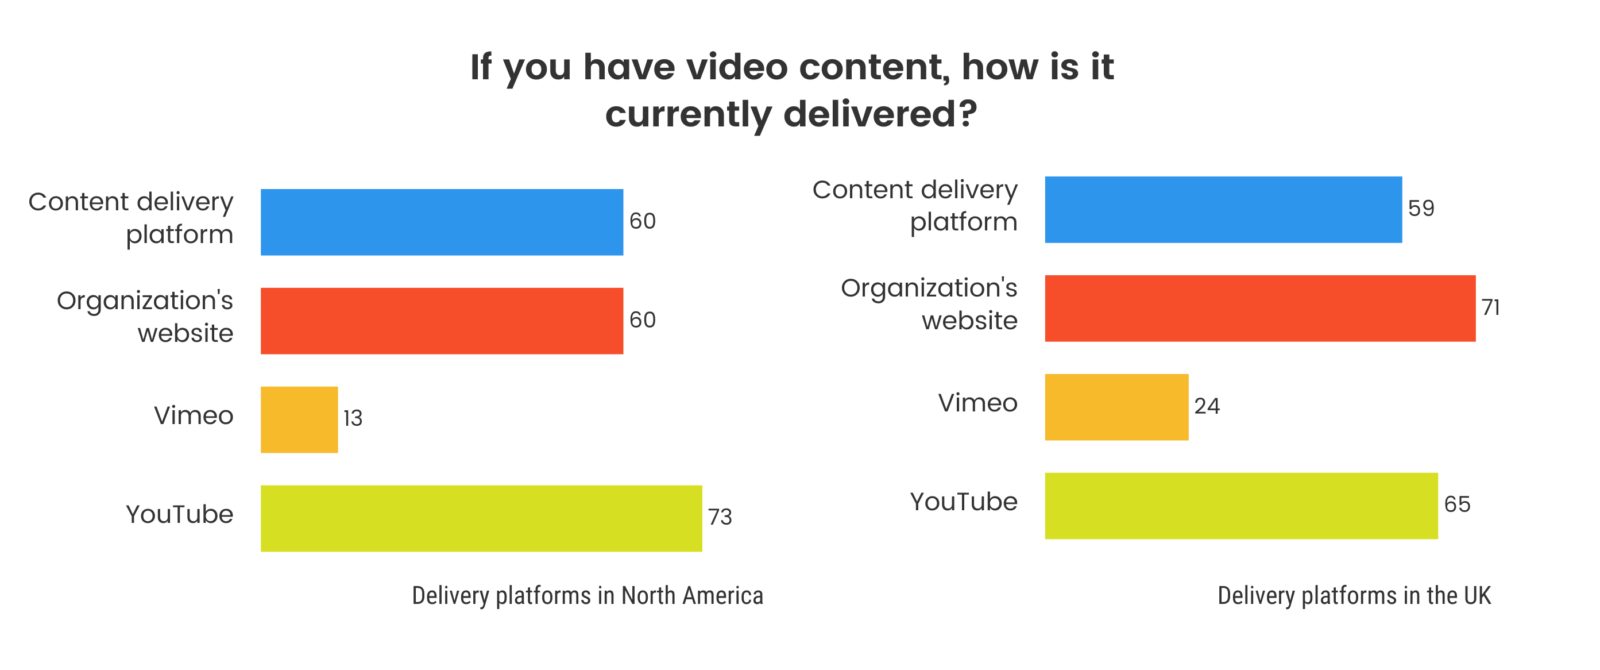 : IF YOU HAVE VIDEO CONTENT, HOW IS IT CURRENTLY DELIVERED? in north america 60 said cotent delivery platform, 60% said organizations website, 13% said vimeo, and 73% said YouTube. in the UK, 59% said content delivery platform, 71% said organizations website, 24% said vimeo, and 65% said YouTube